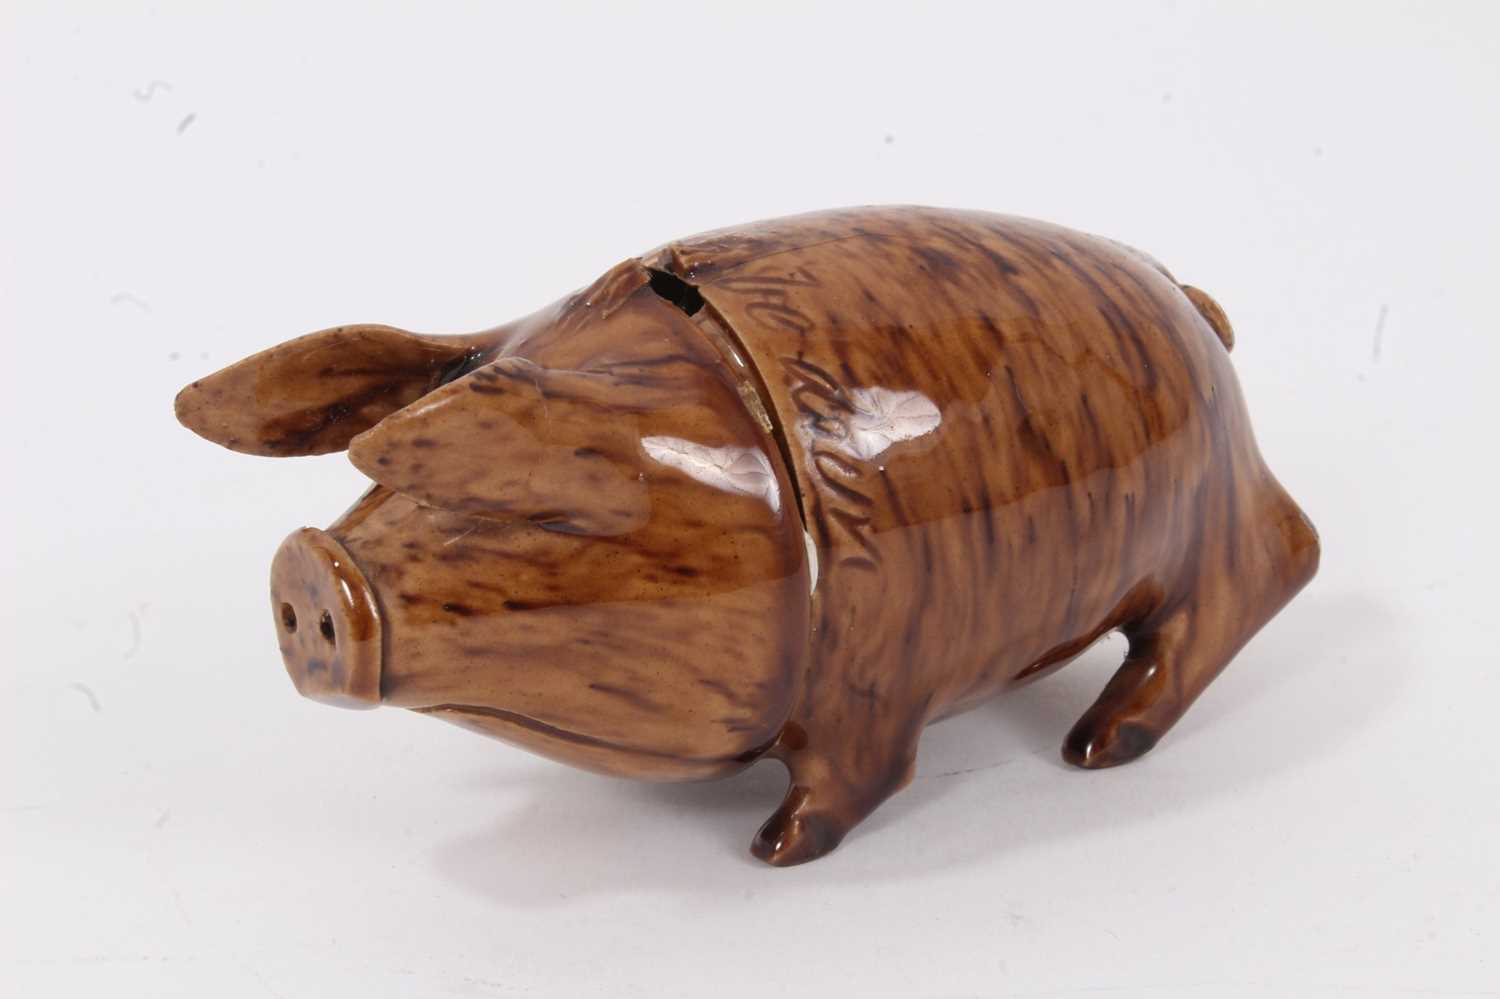 Lot 43 - Rye pottery treacle-glazed Sussex pig